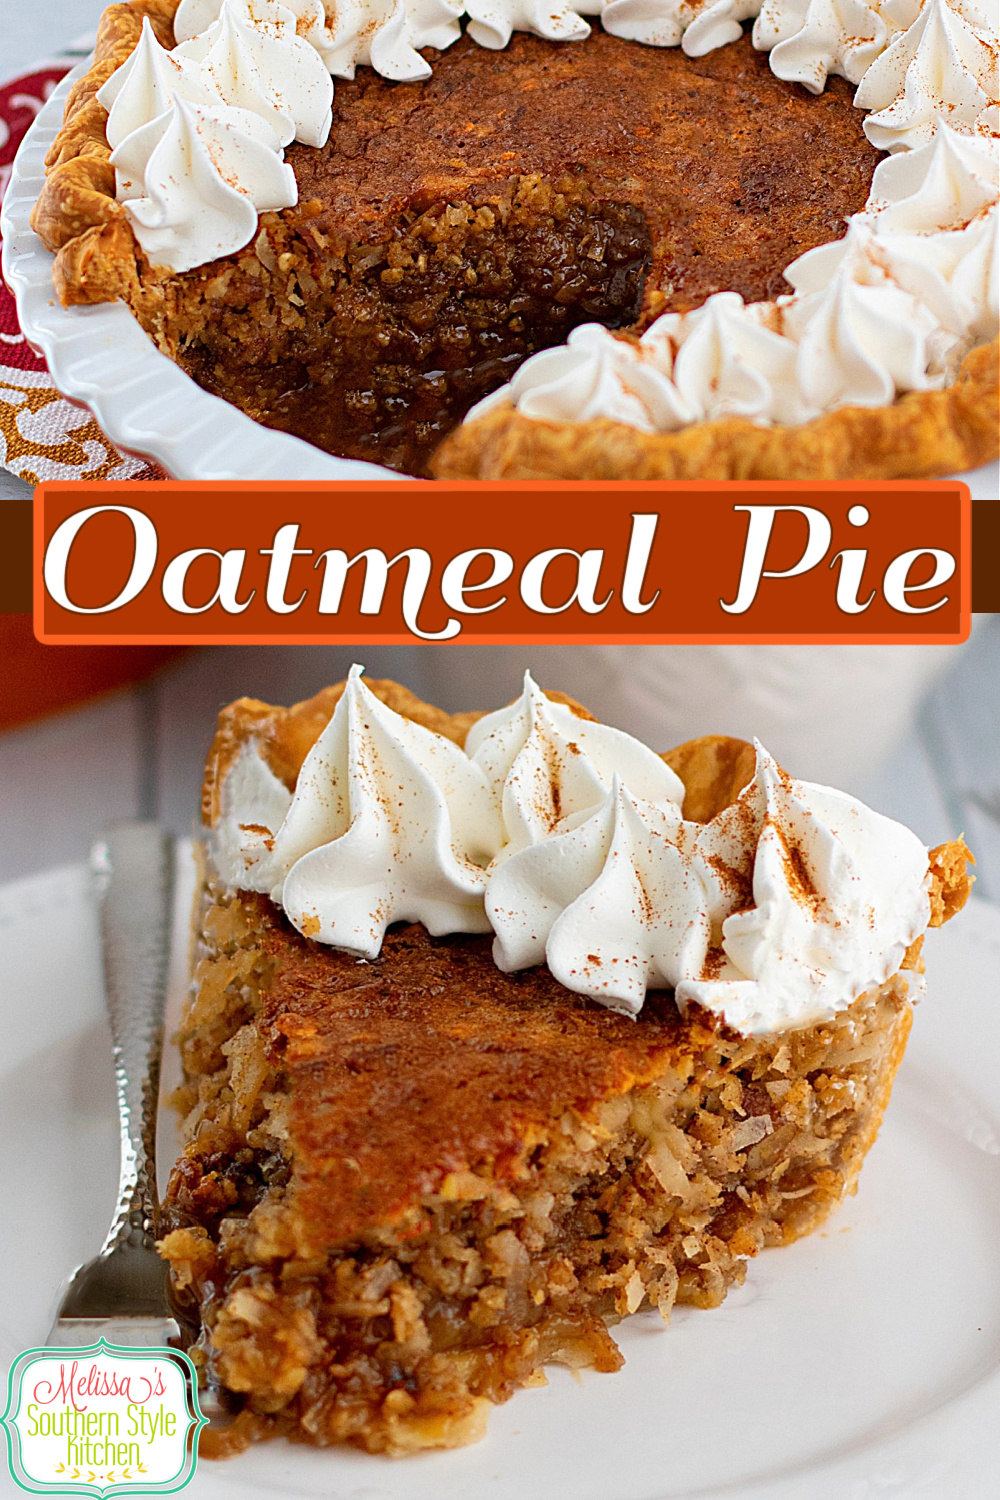 This vintage Oatmeal Pie can be served chilled, warm or at room temperature with vanilla ice cream or whipped cream #oatmealpie #pierecipes #pies #oatmeal #thanksgivingpies #fallbaking #fallpies #oatmealrecipes #sweets #southernpierecipes via @melissasssk